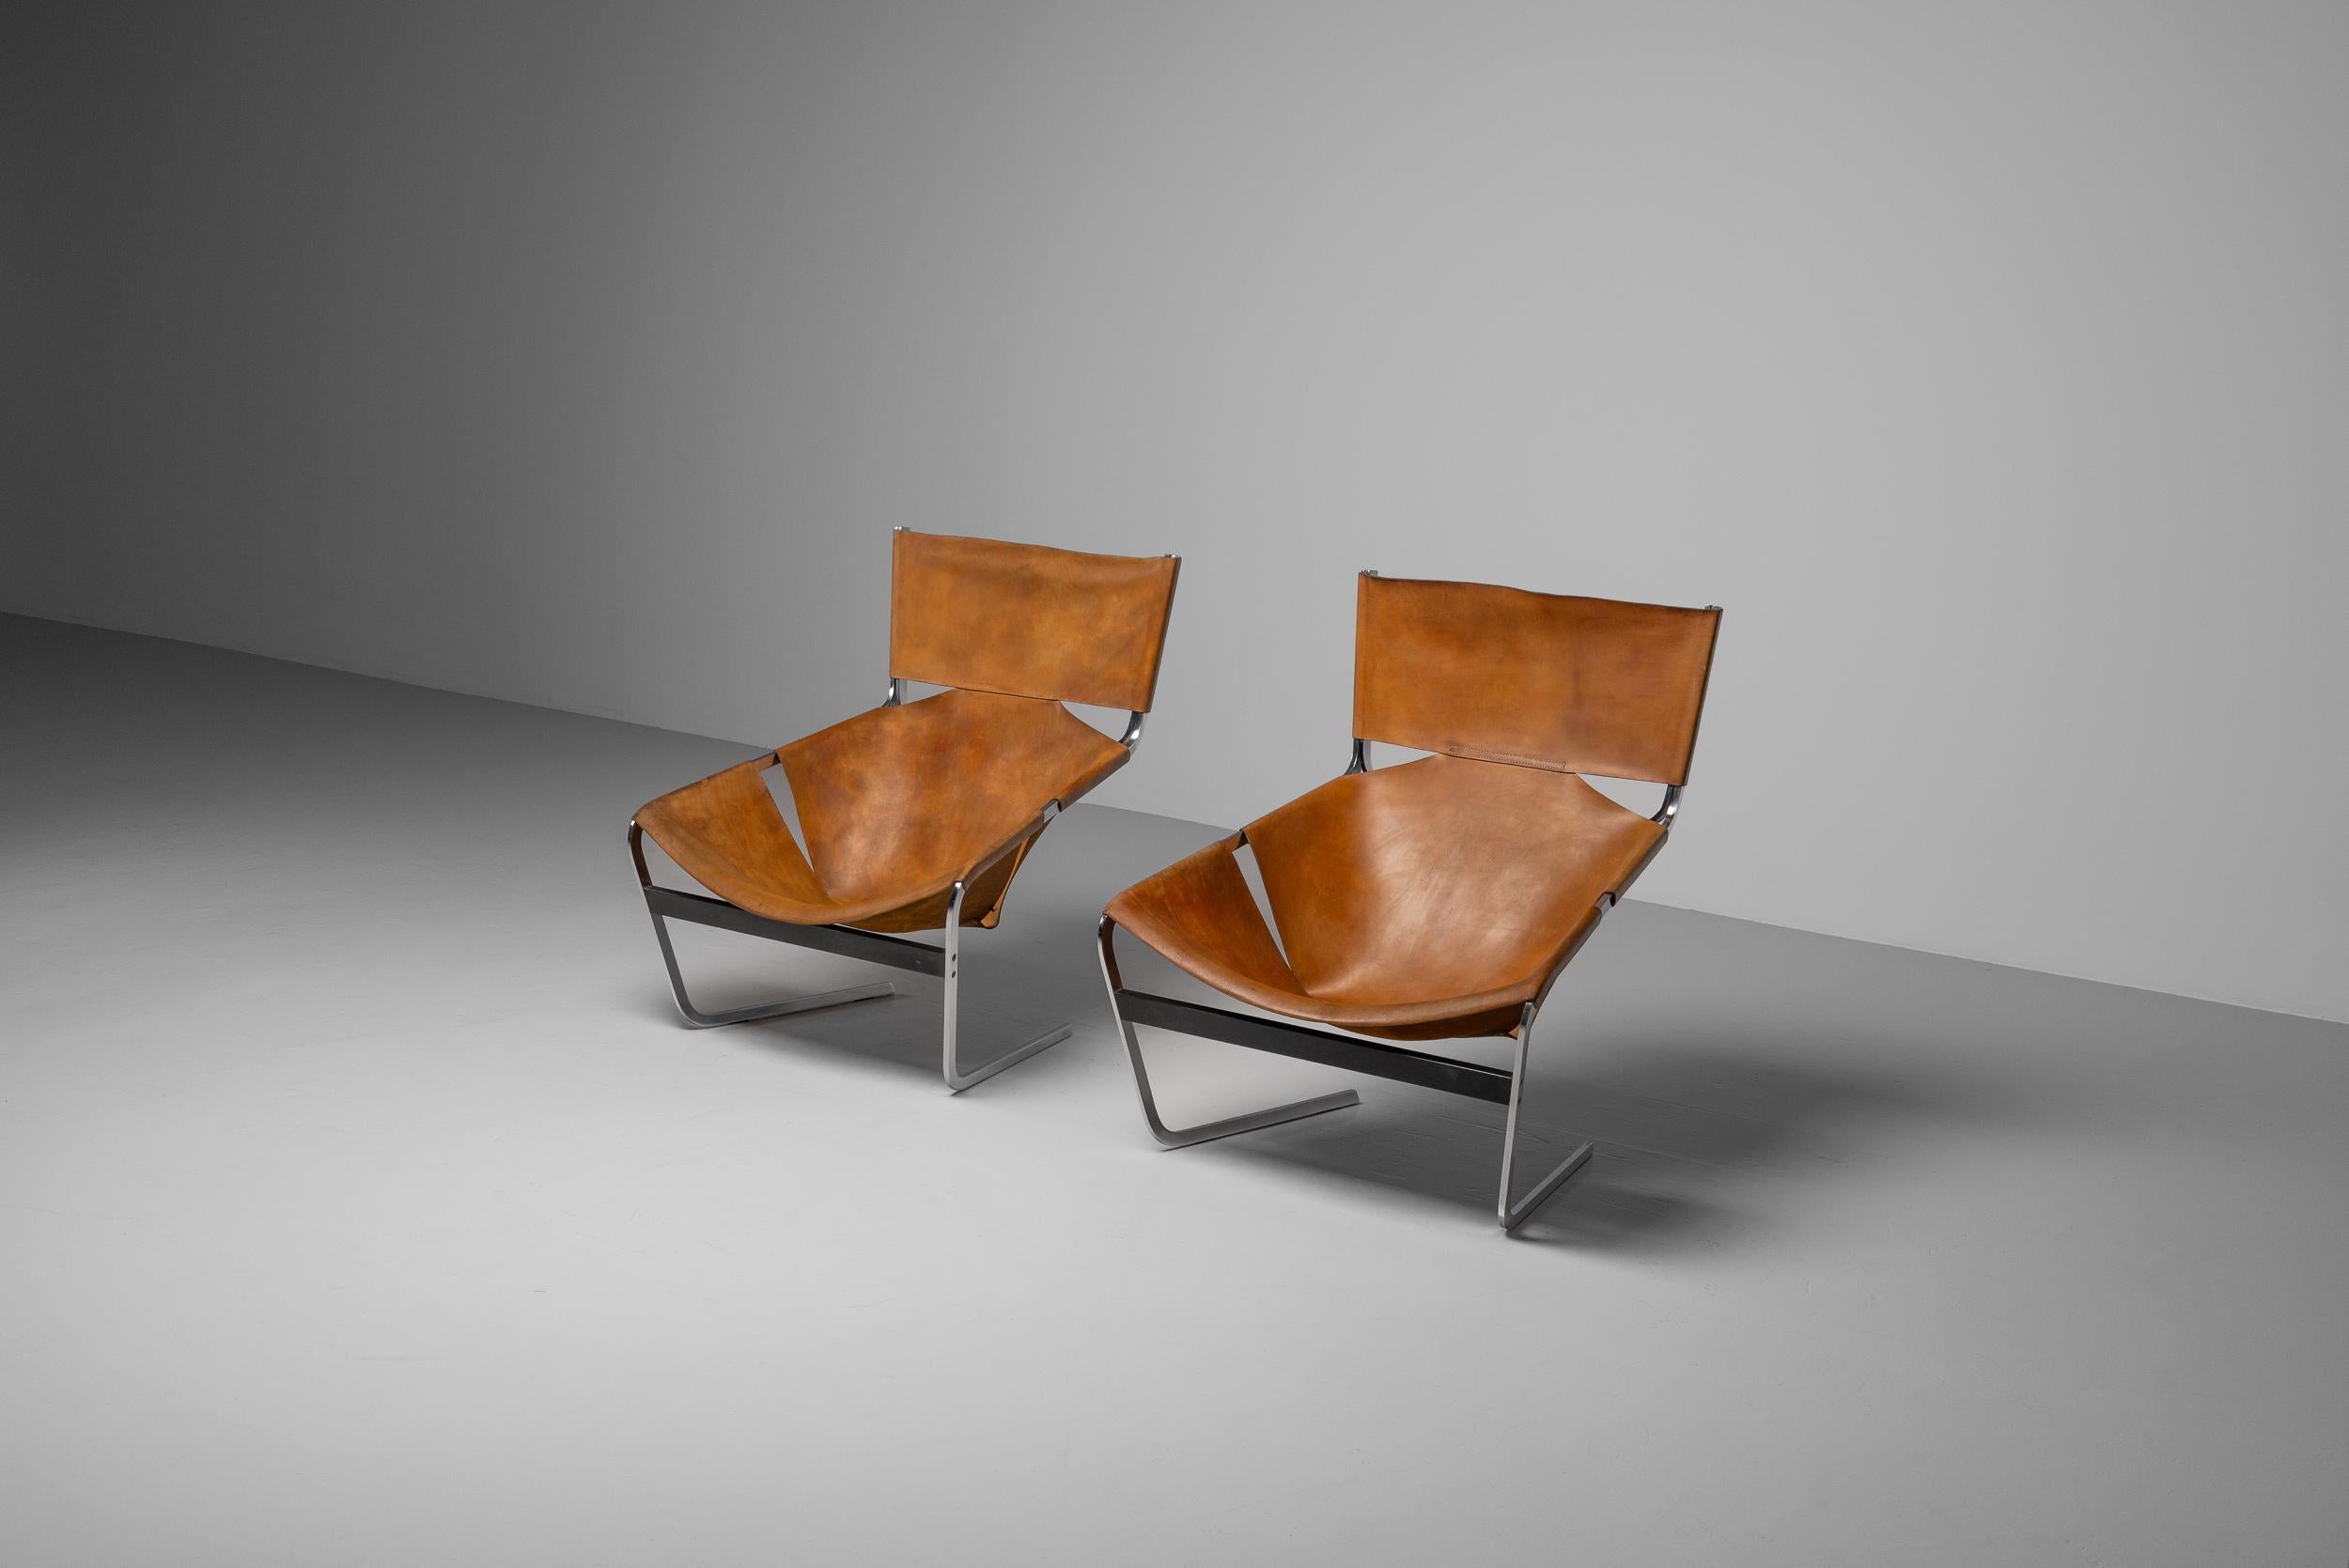 Pierre Paulin F444 lounge chairs pair Artifort 1963 In Good Condition For Sale In Roosendaal, Noord Brabant